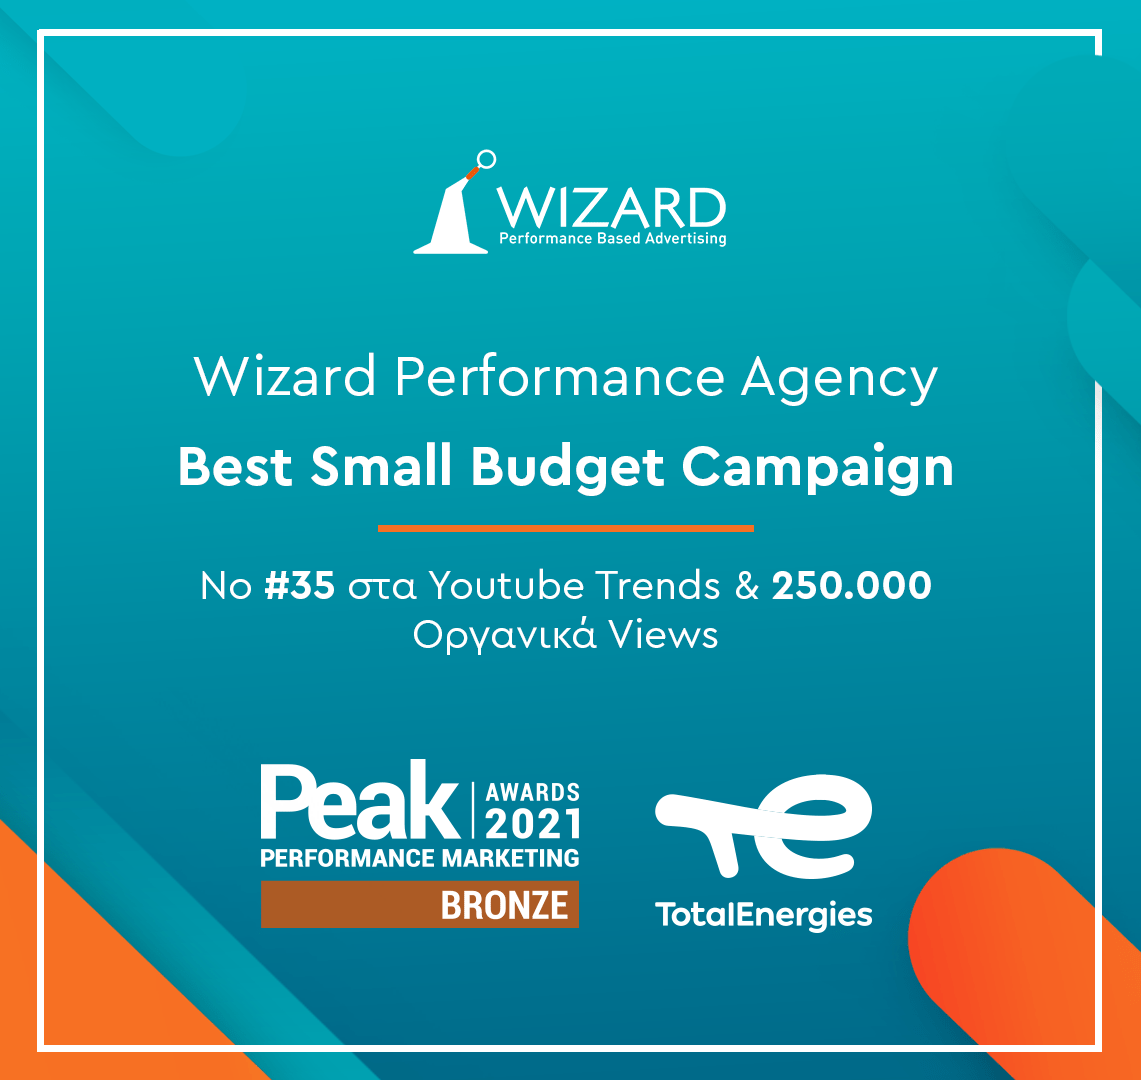 BRONZE Award - Peak Awards 2021 supported by Google